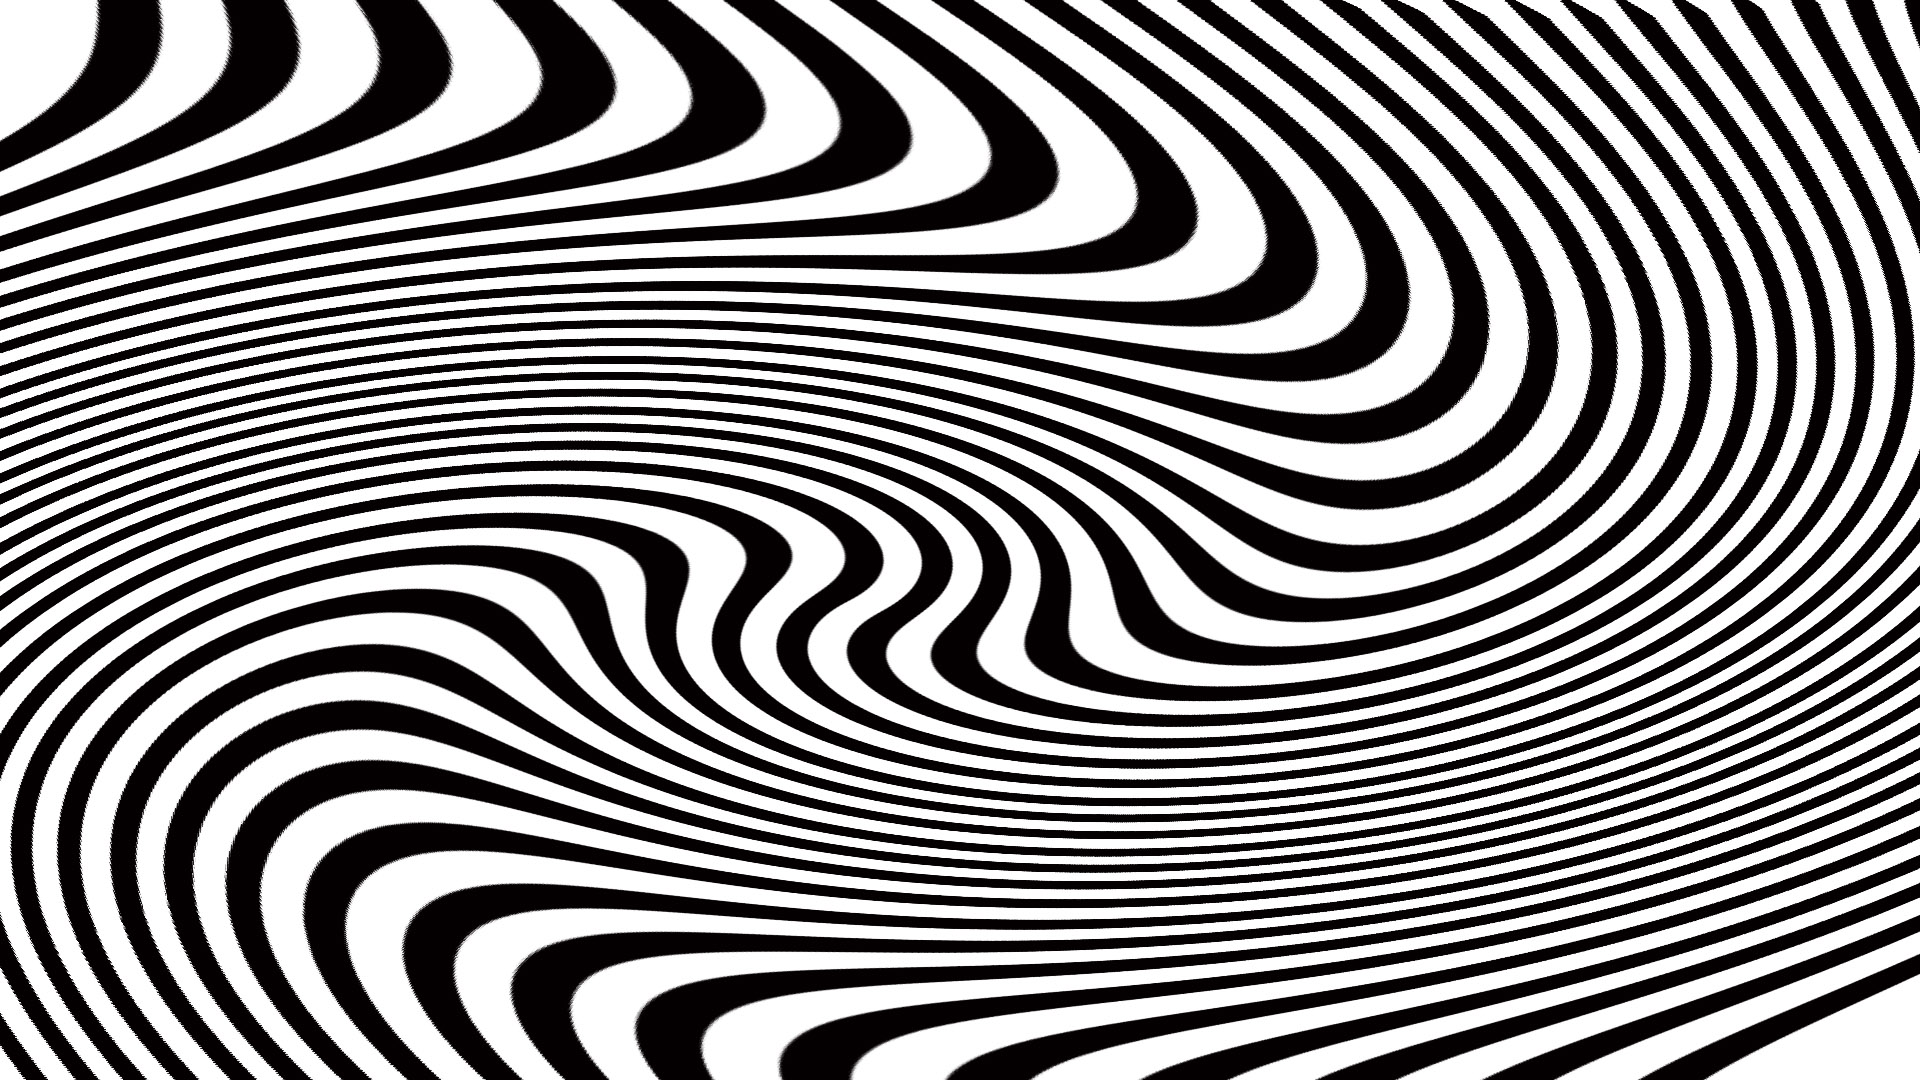 psychedelic, abstract, black & white, ripple